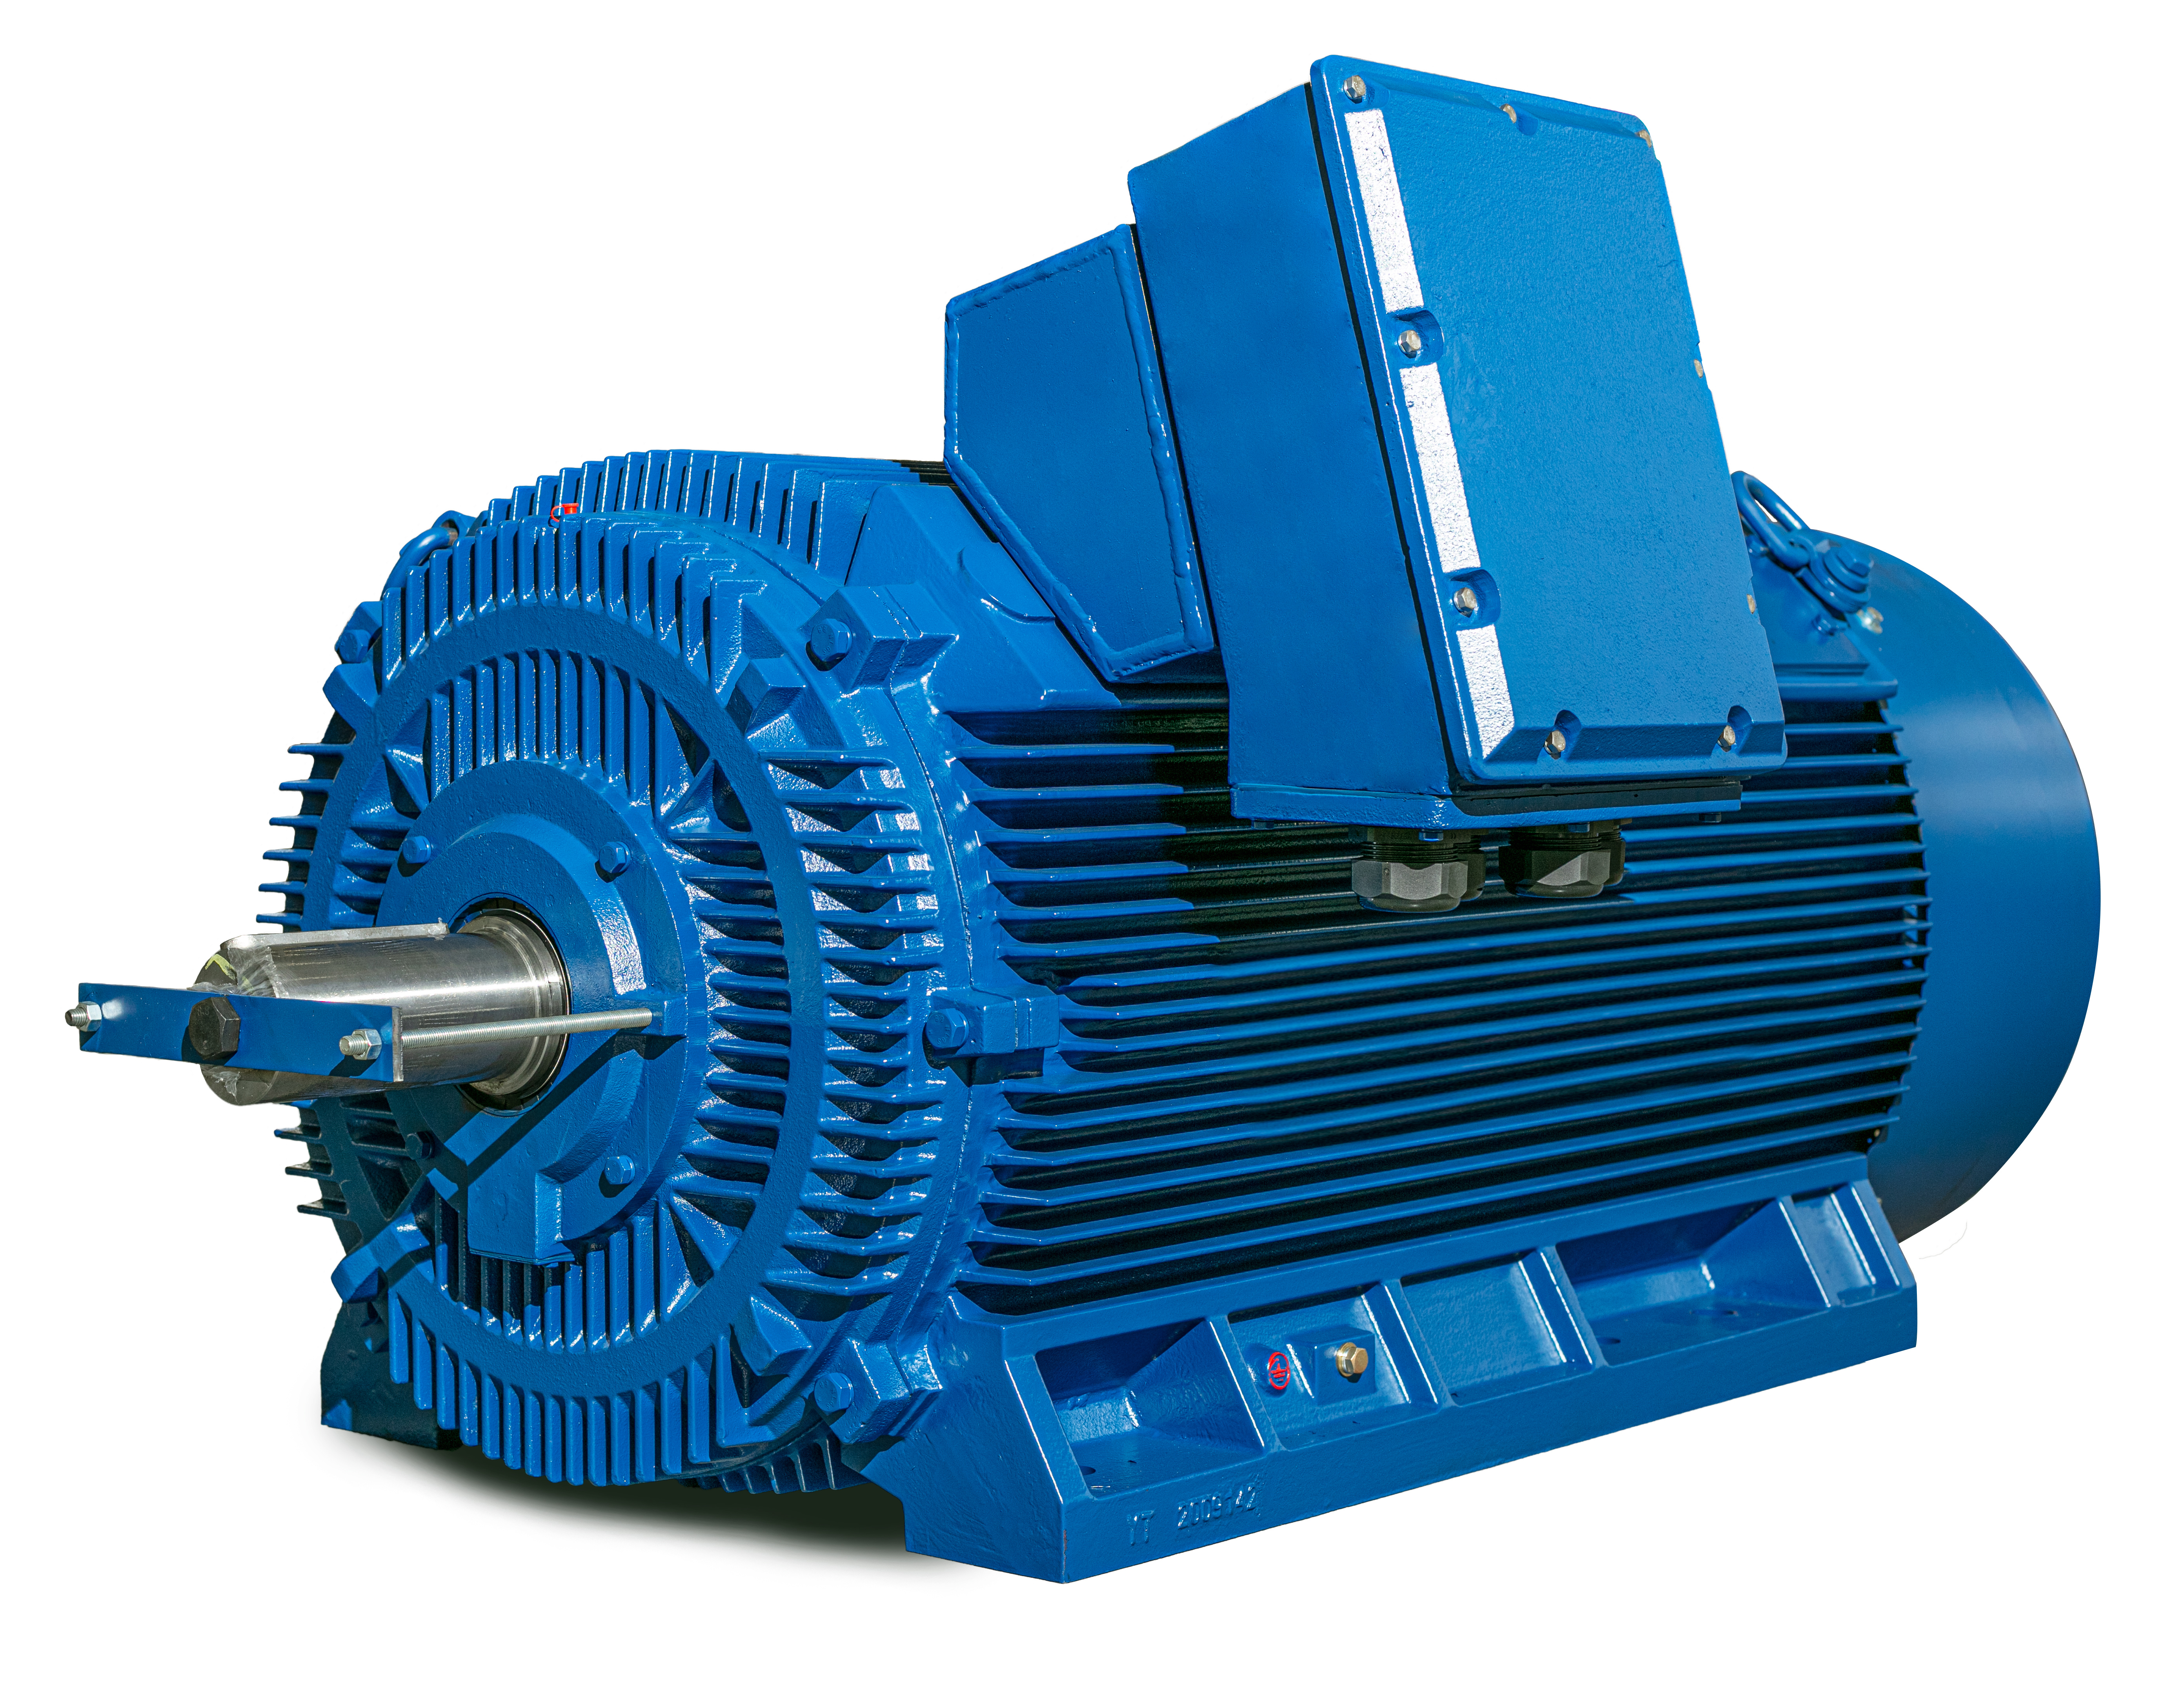 AC Electric Motor Market Projected to Grow at 5.10% CAGR,